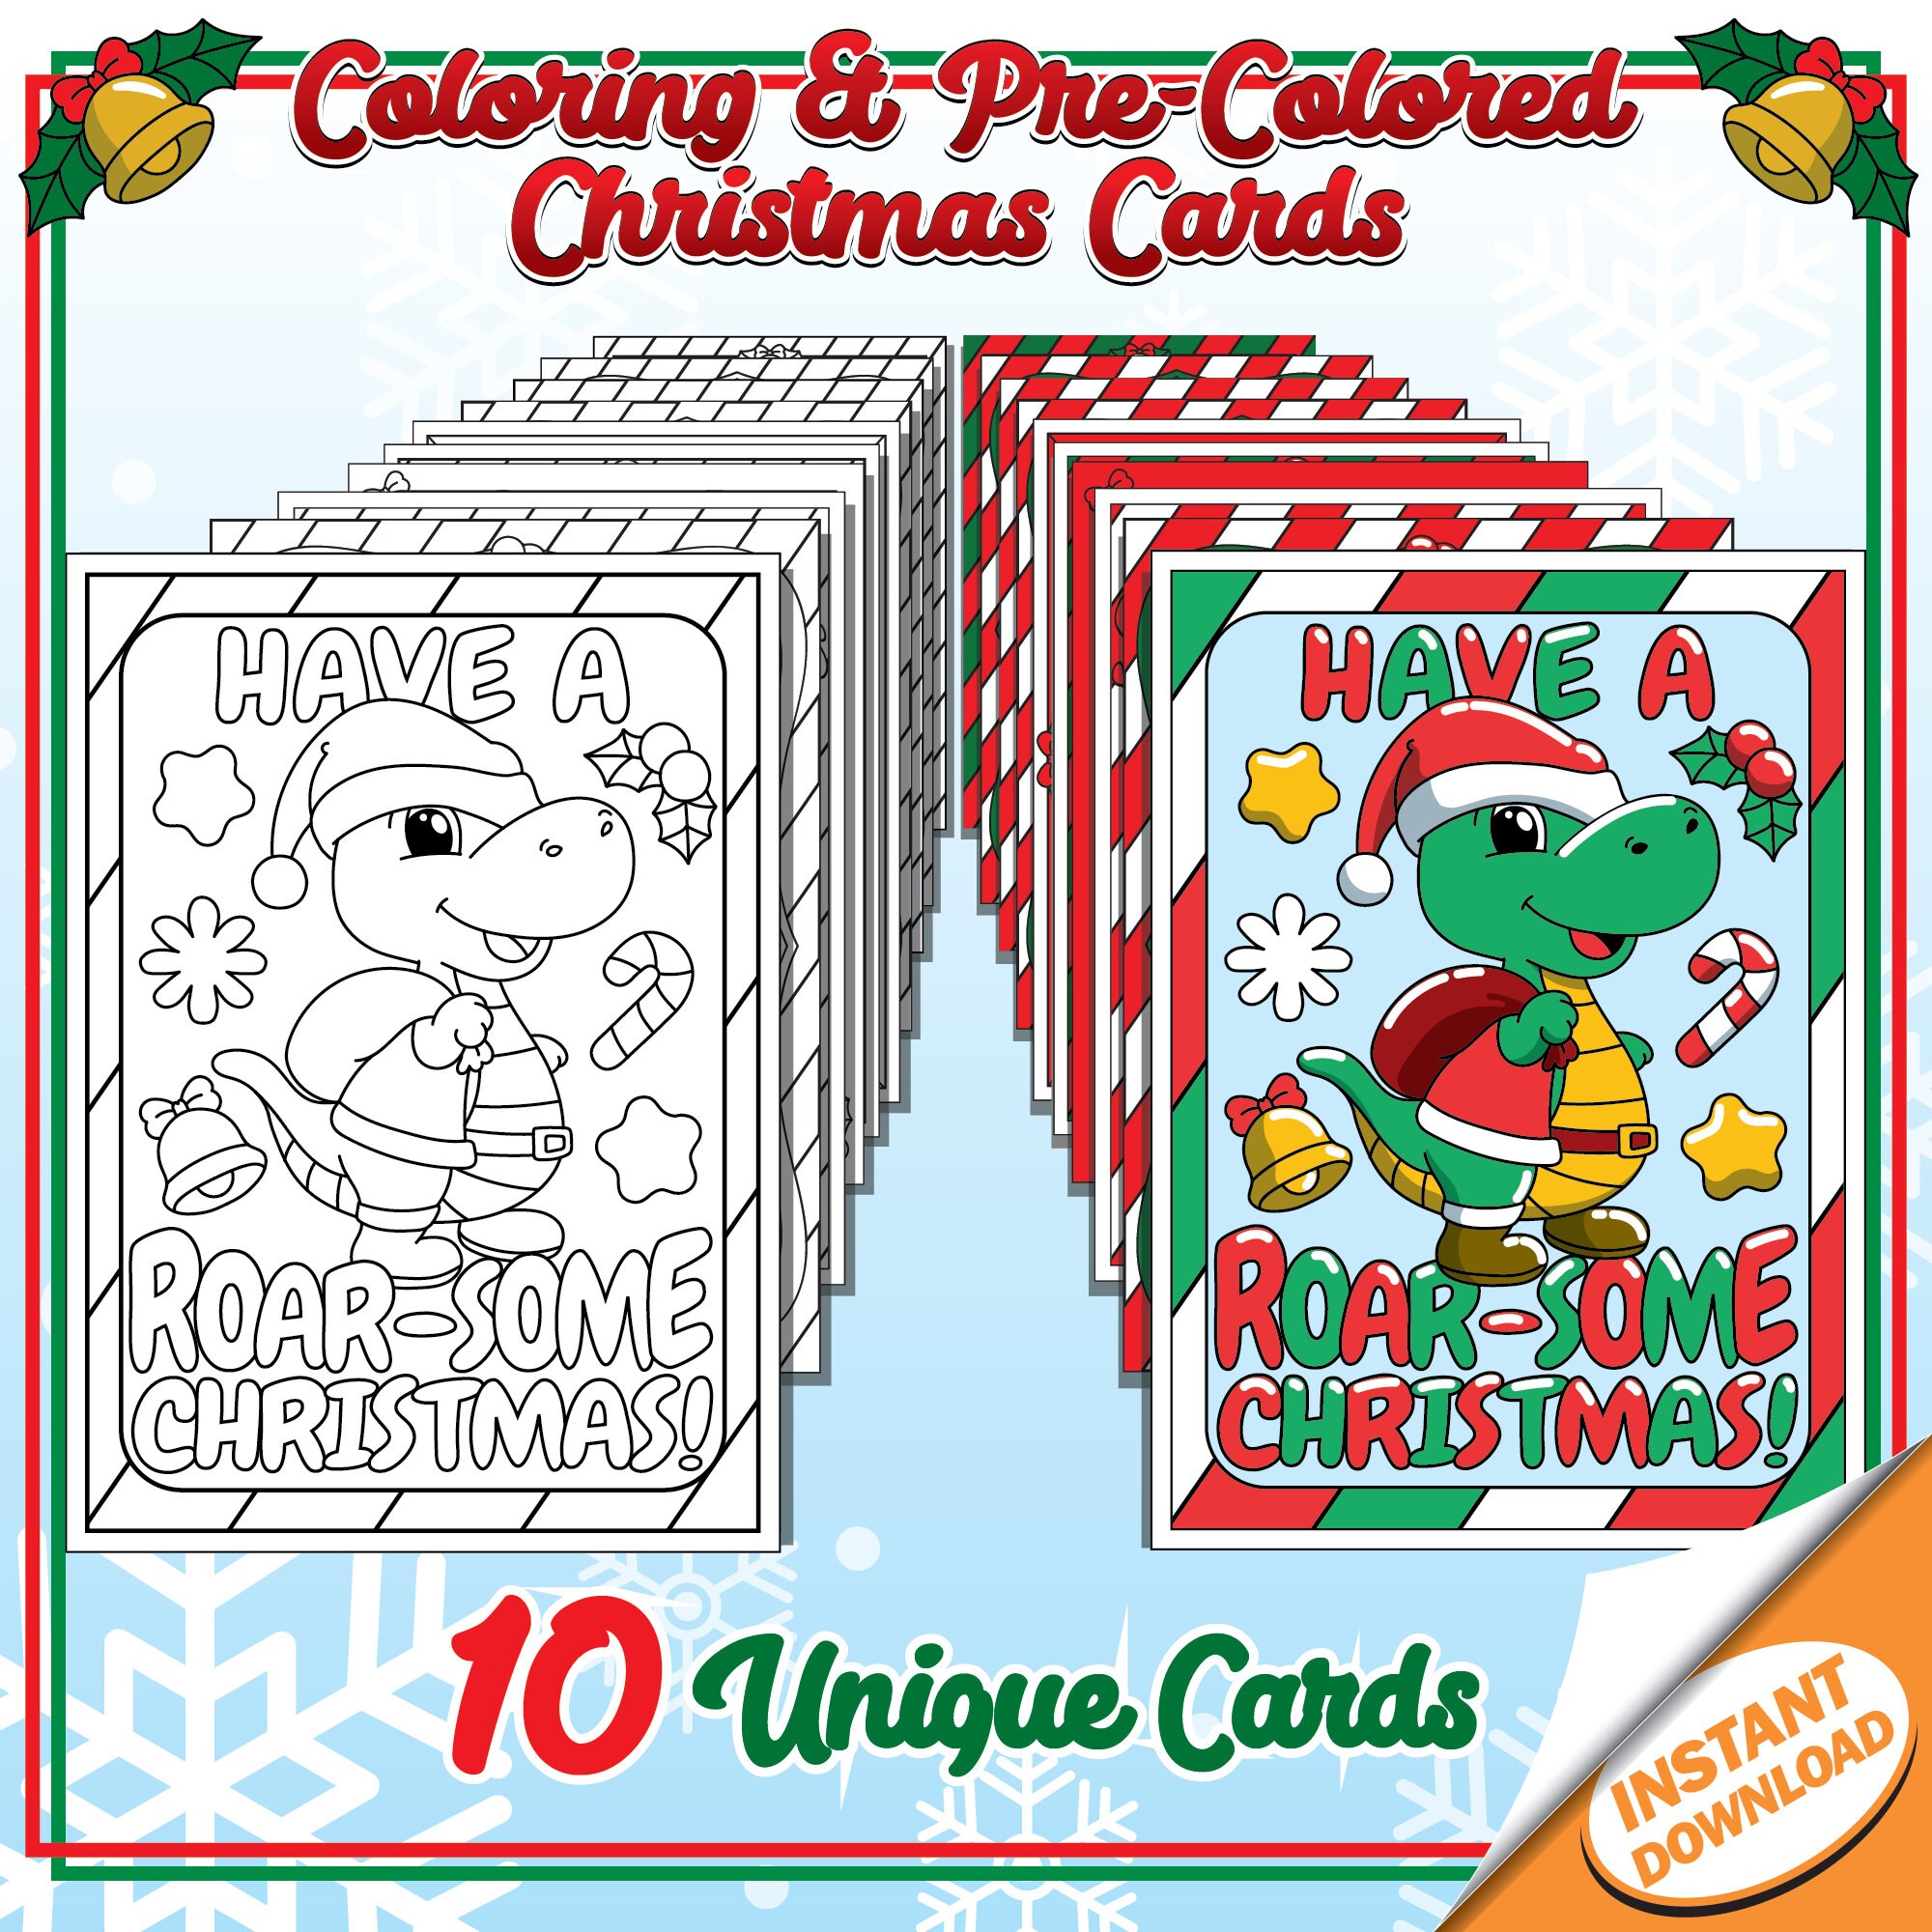 Christmas Coloring Cards for Kids, Set of 10 Colorable and Colored Holiday Greeting Cards, DIY Festive Printable Instant Digital Download